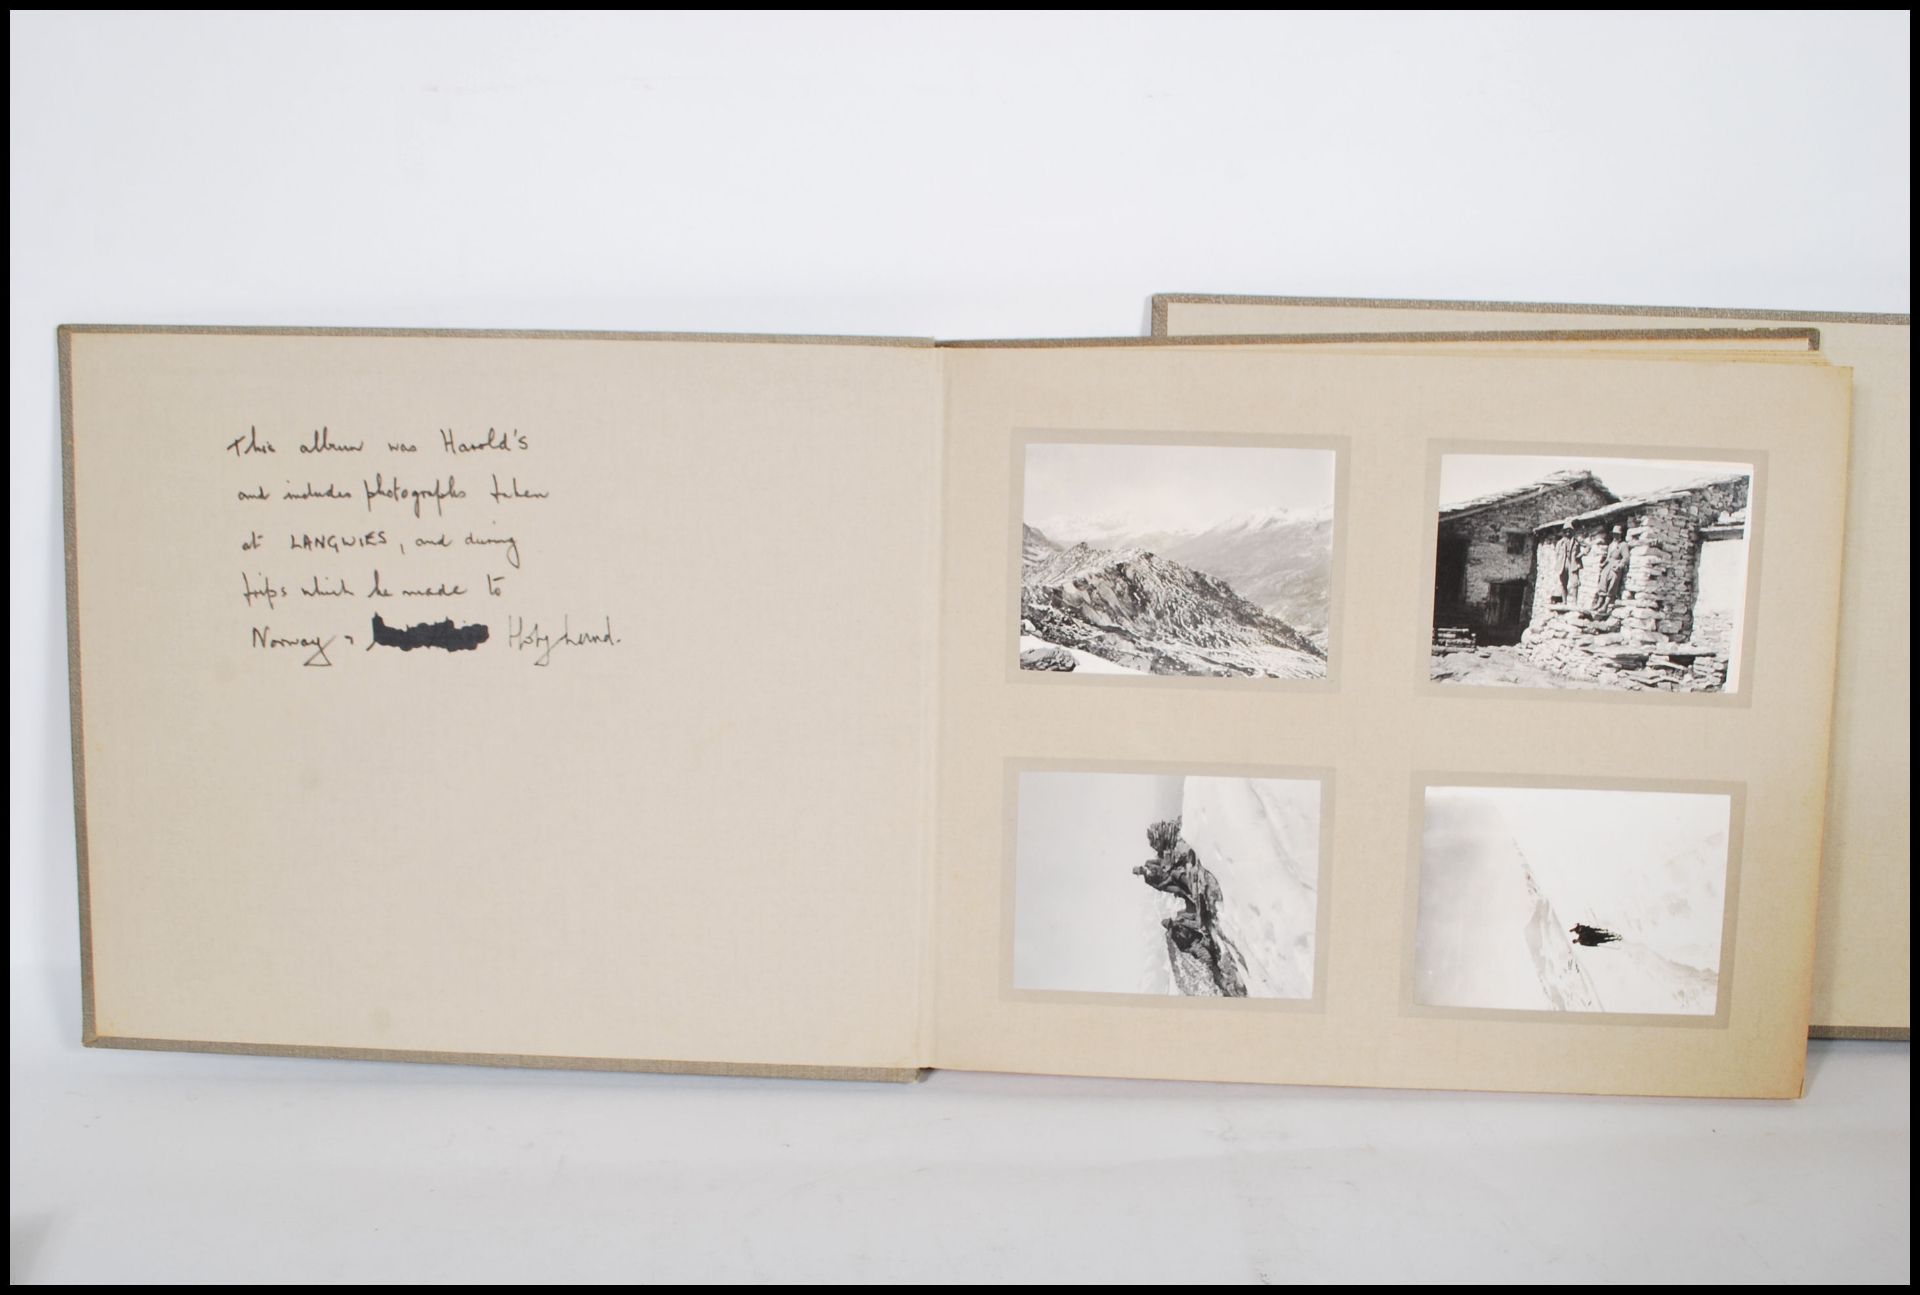 Three Photograph albums circa 1920/30's of trips to Norway and Switzerland showing skiing, - Image 6 of 16